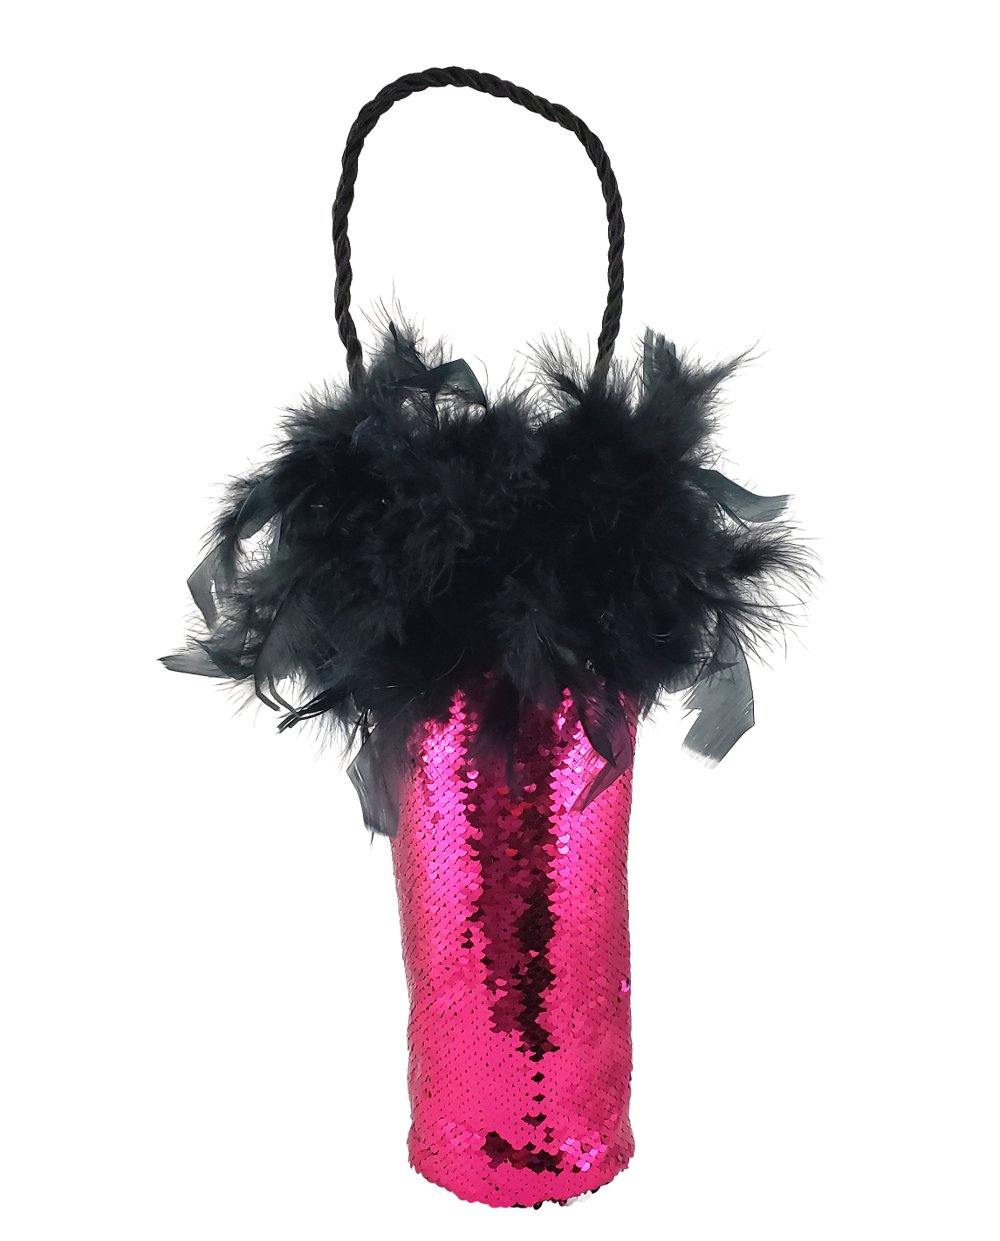 Diva Wine Bag with Hot Pink and Silver Reversible Mermaid Sequin Fabric and Feather Trim - Tipsy Totes | Wine Gifts | Beer Koozies | Wine Totes | Simply Fabulous